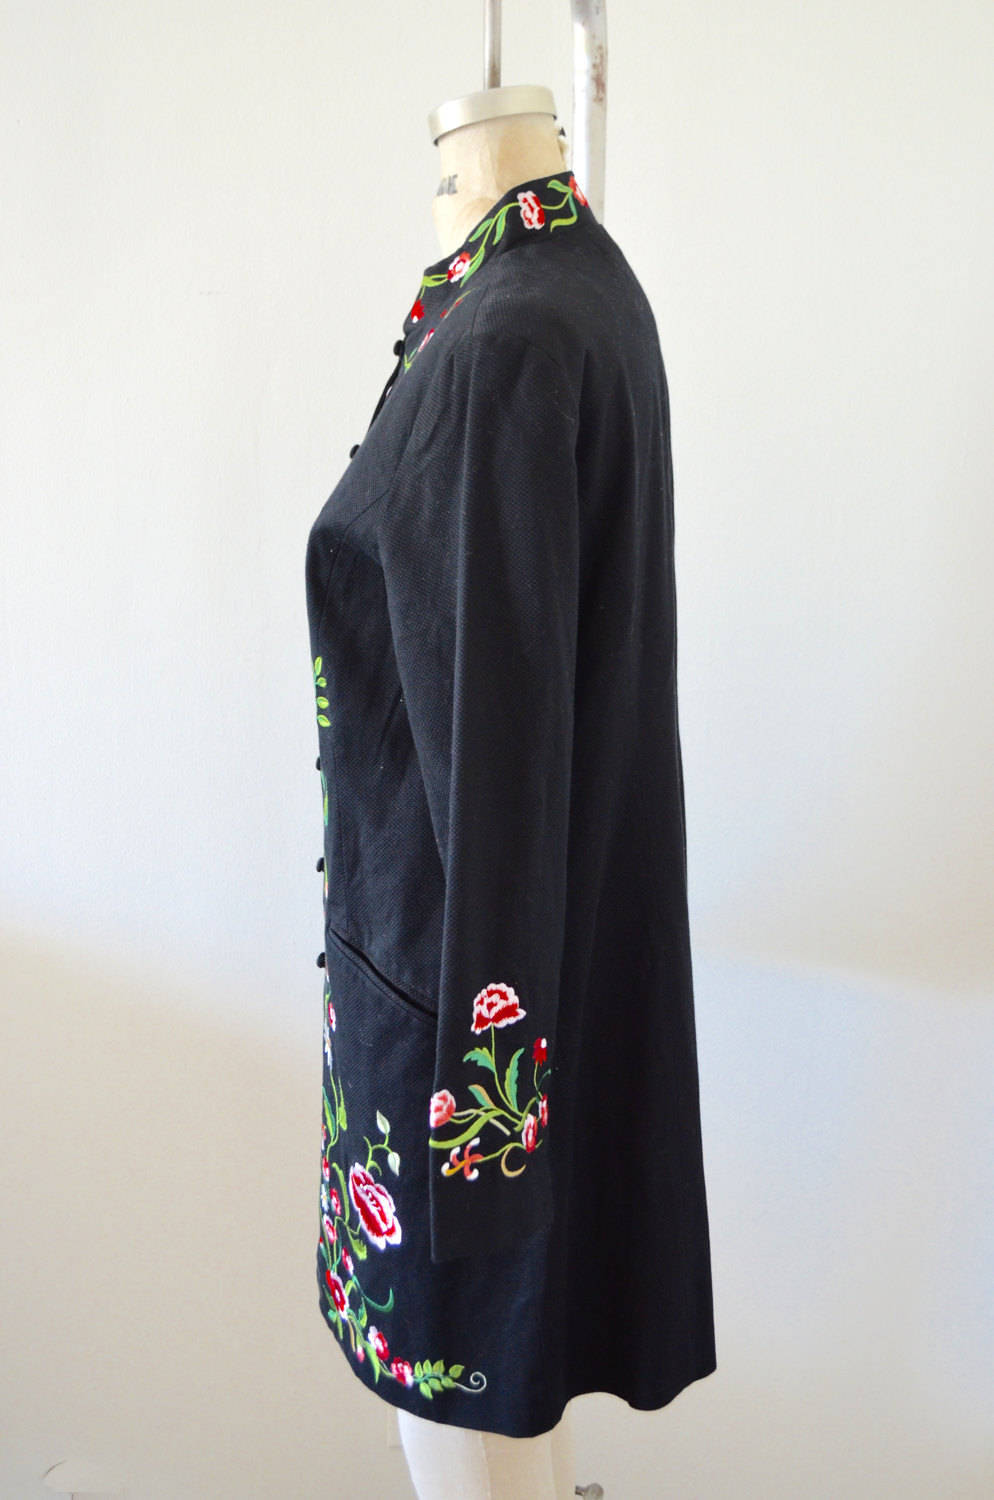 Victor Costa Black Embroidered Duster Long Asian Floral Garden Printed Jacket Coat